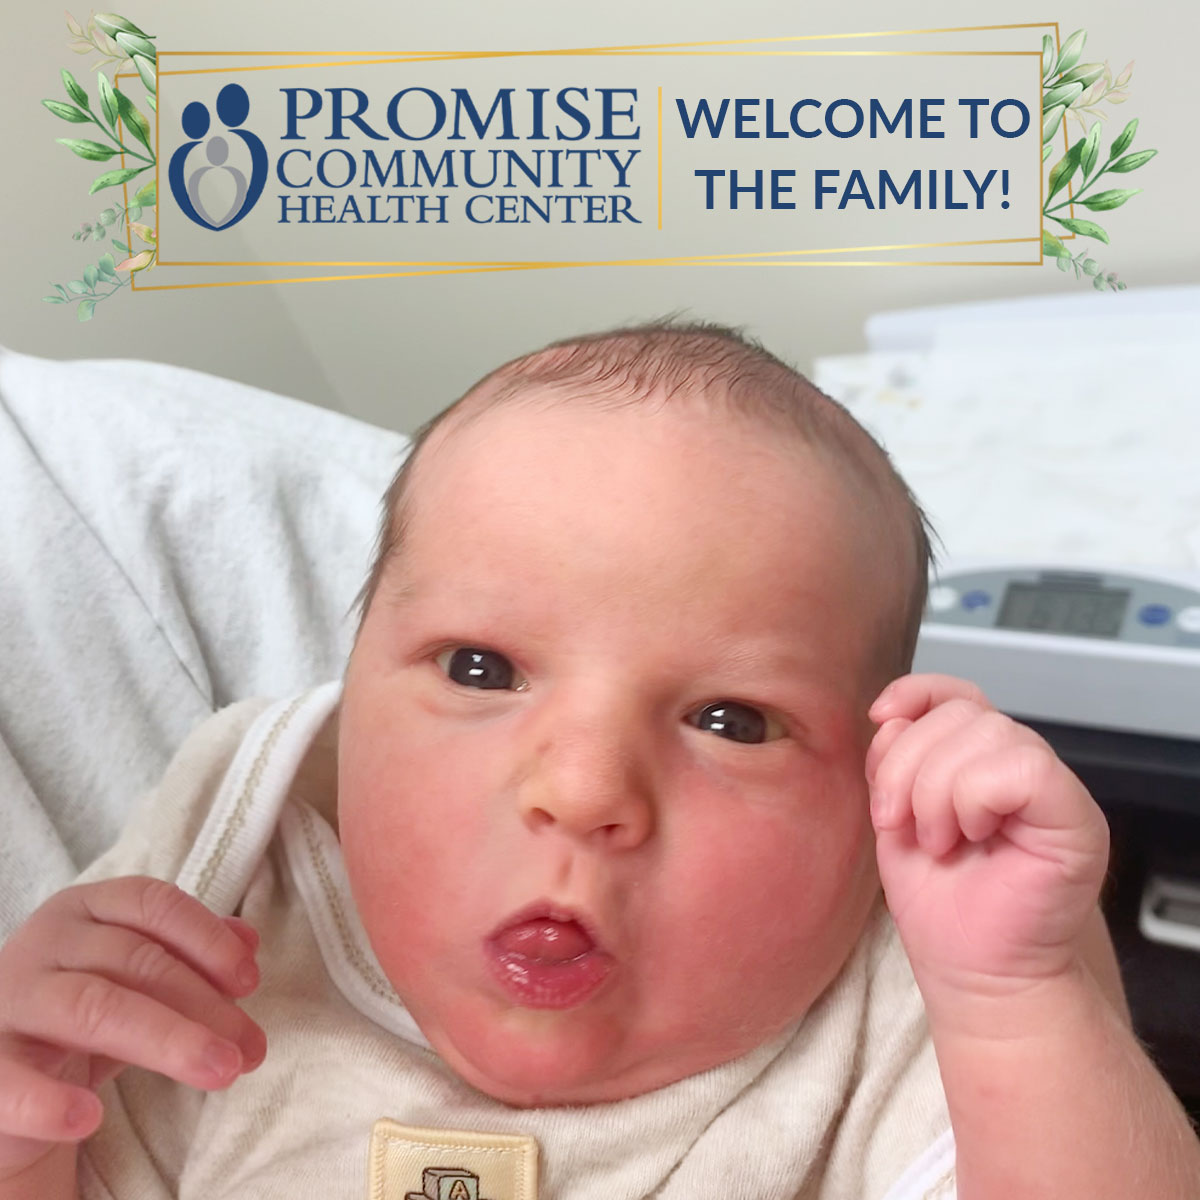 Hospital birth in Sioux Falls, South Dakota |Promise Community Health Center in Sioux Center, Iowa | Home births in northwest Iowa, Home births in southeast South Dakota, Home births in southwest Minnesota | Home births in Sioux Falls South Dakota, Home births in Beresford South Dakota, Home births in Sioux City IA, Home births in LeMars IA, Home births in Worthington MN, Home births in Iowa, Home births in South Dakota, Home births in Minnesota